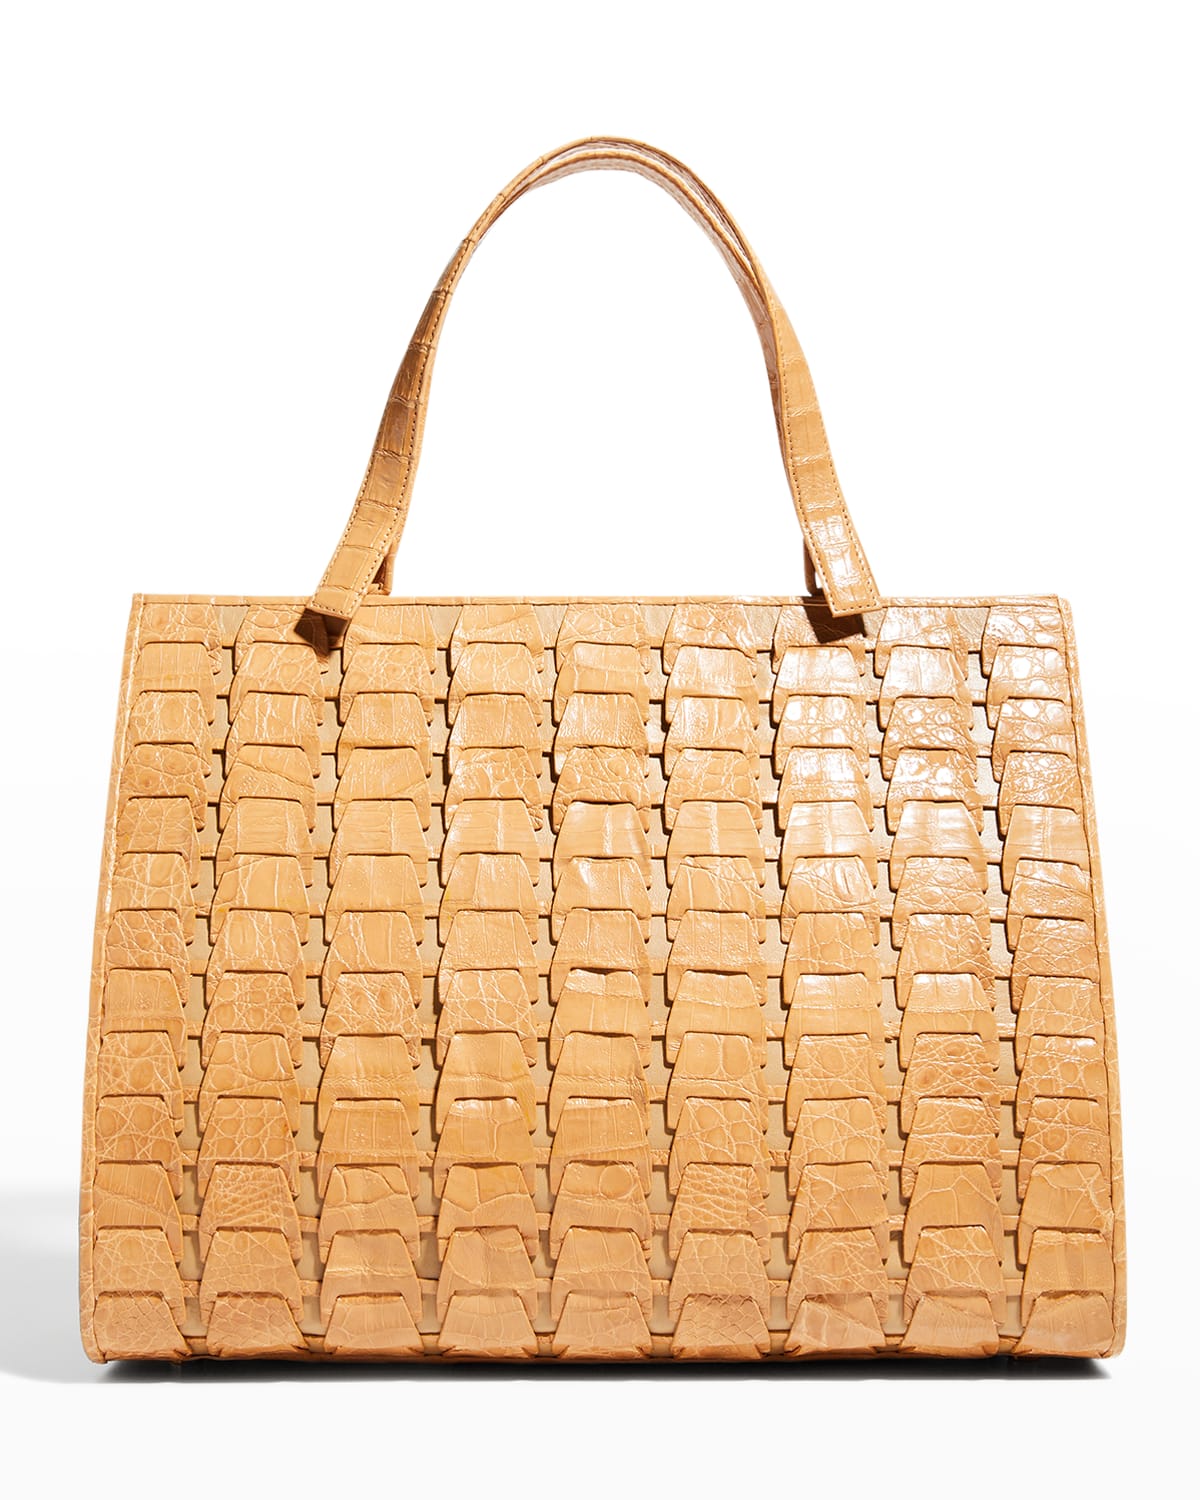 Details about   Raviani Tote in Brown Embossed Crocodile Cowhide Leather Tote